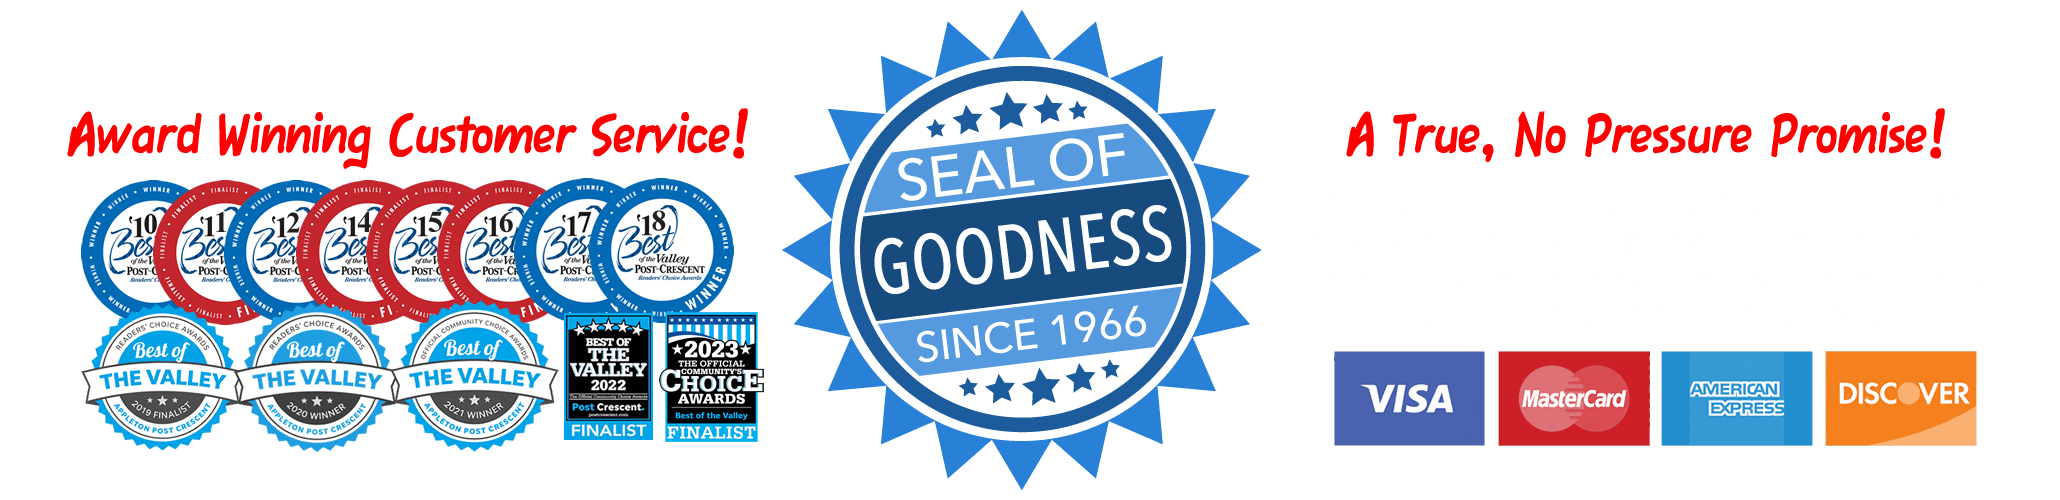 Award Winning Customer Service, Seal of Goodness Guarantee since 1966. No Pressure Promise! We do not utilize any high pressure tactics in our sales process, ever.